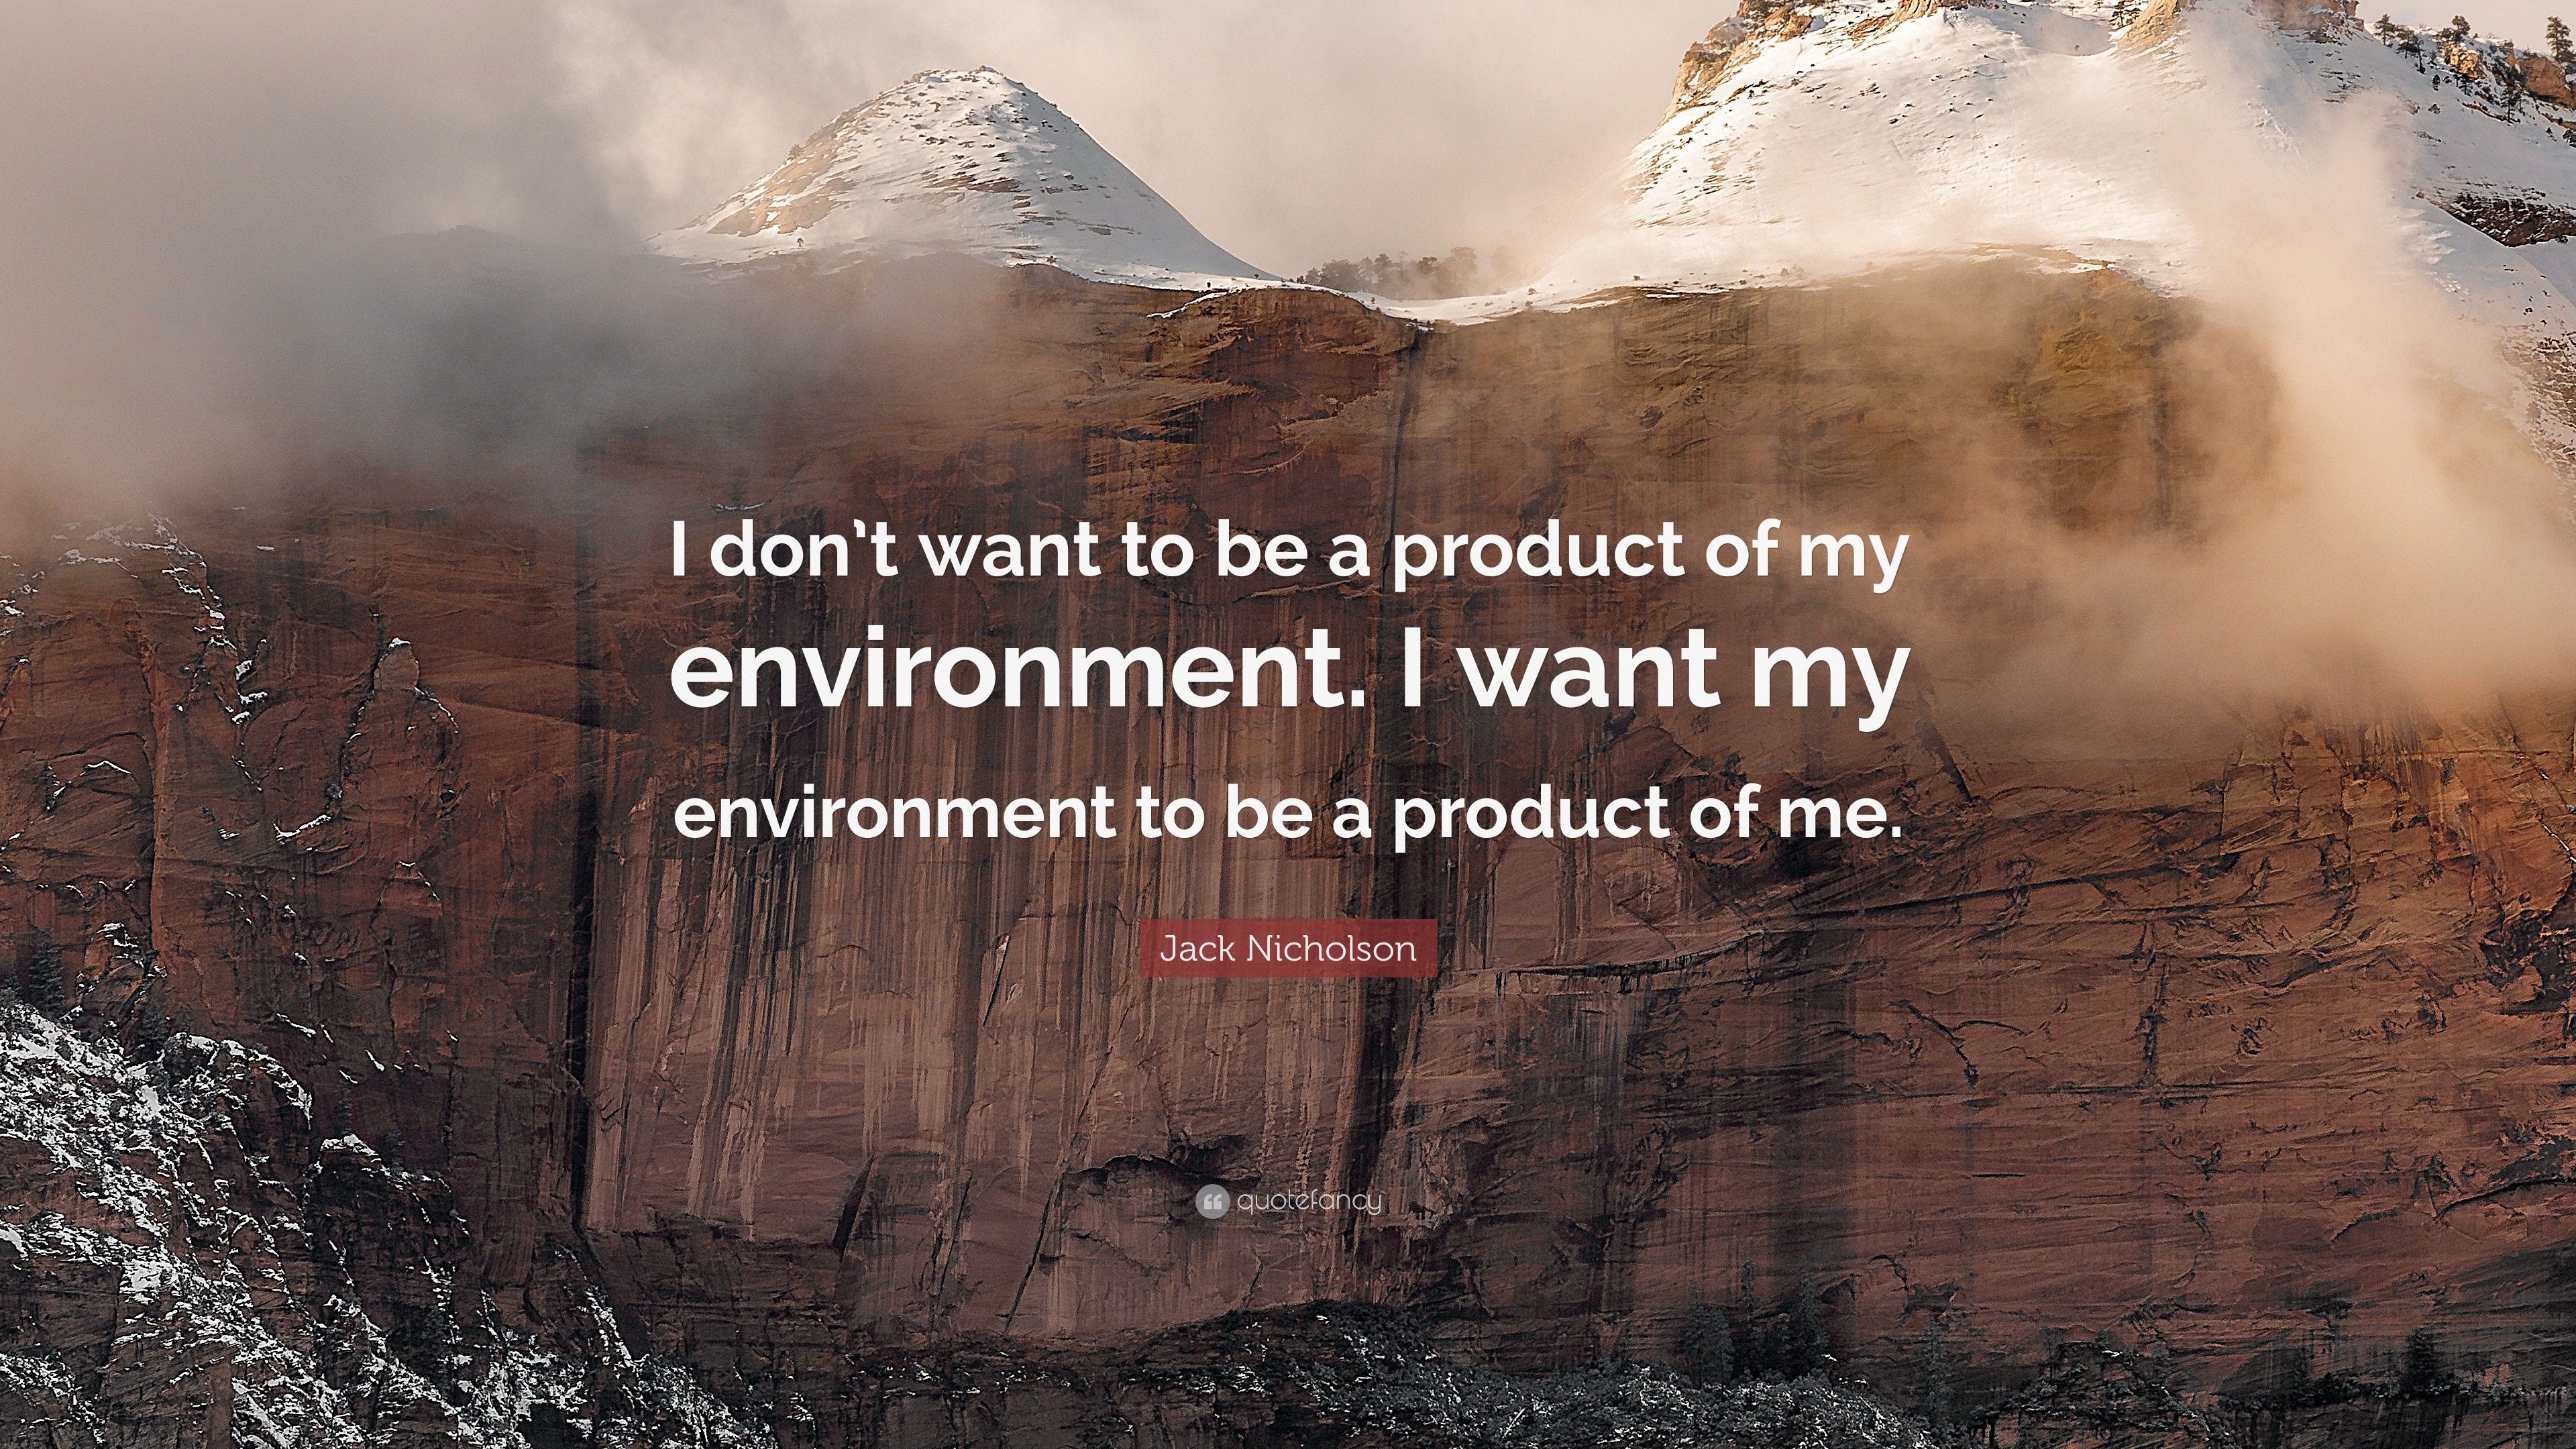 Product Of Your Environment Quote : You're a product of your